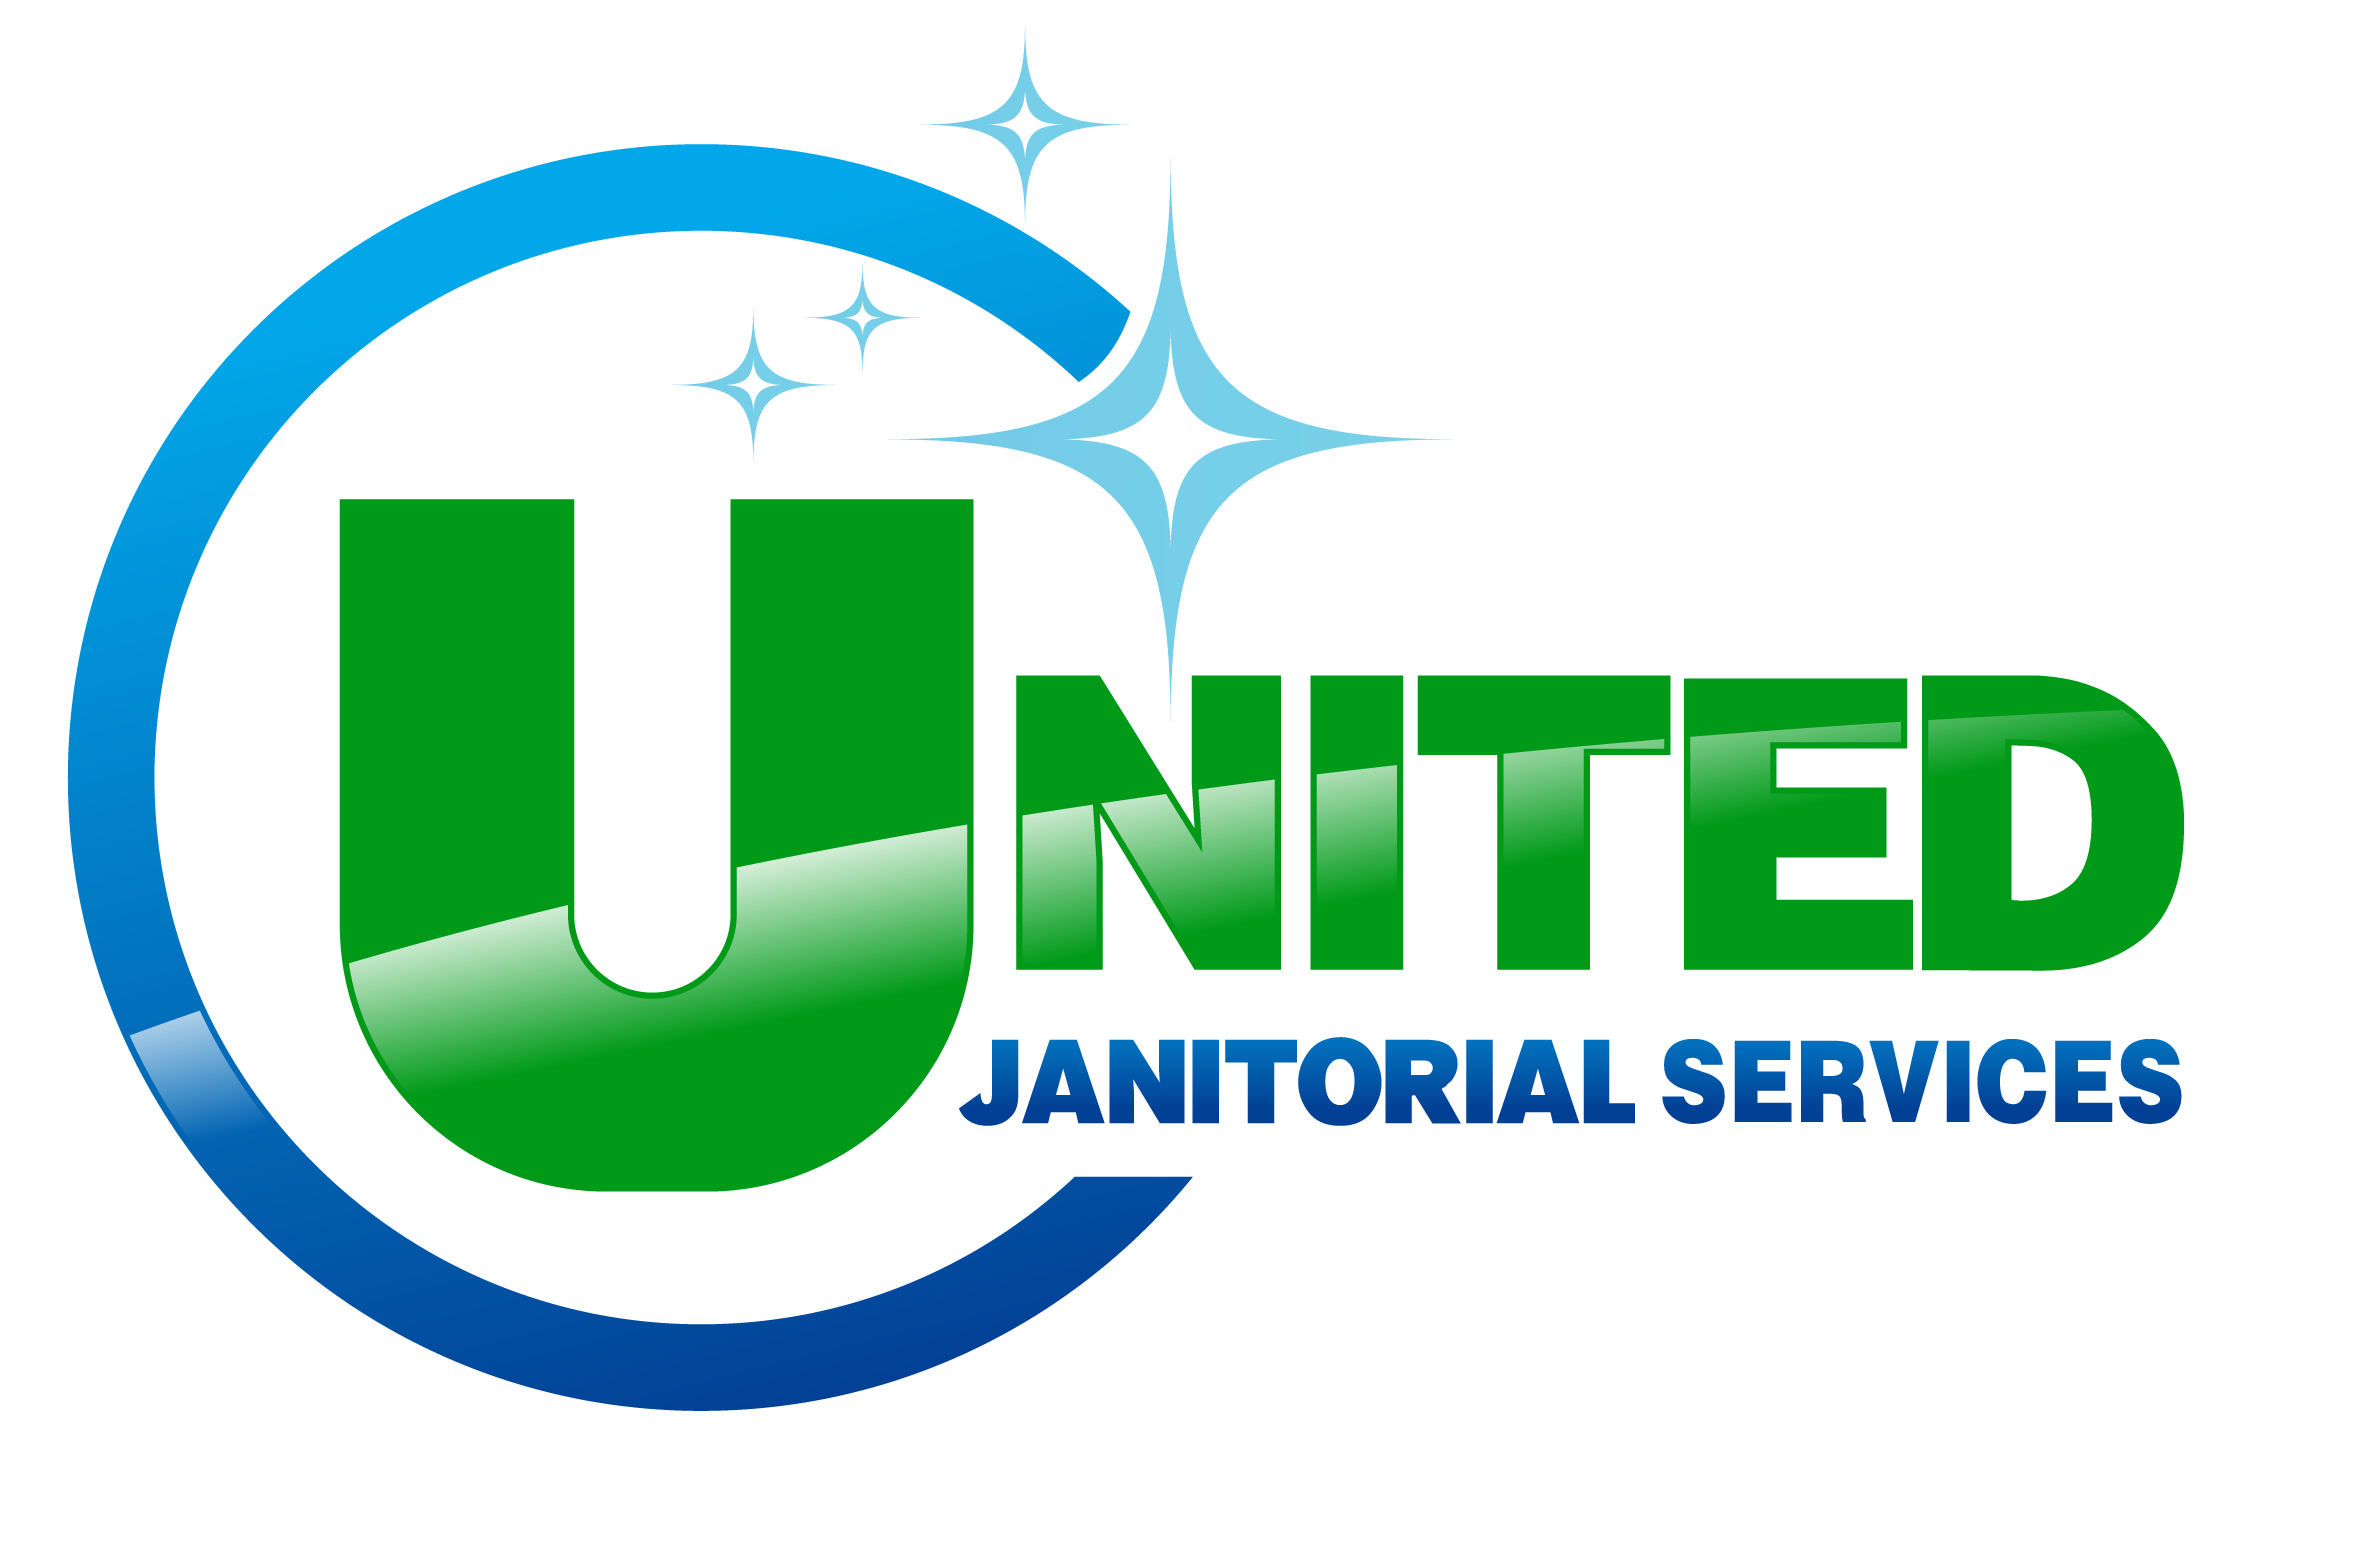 United Janitorial